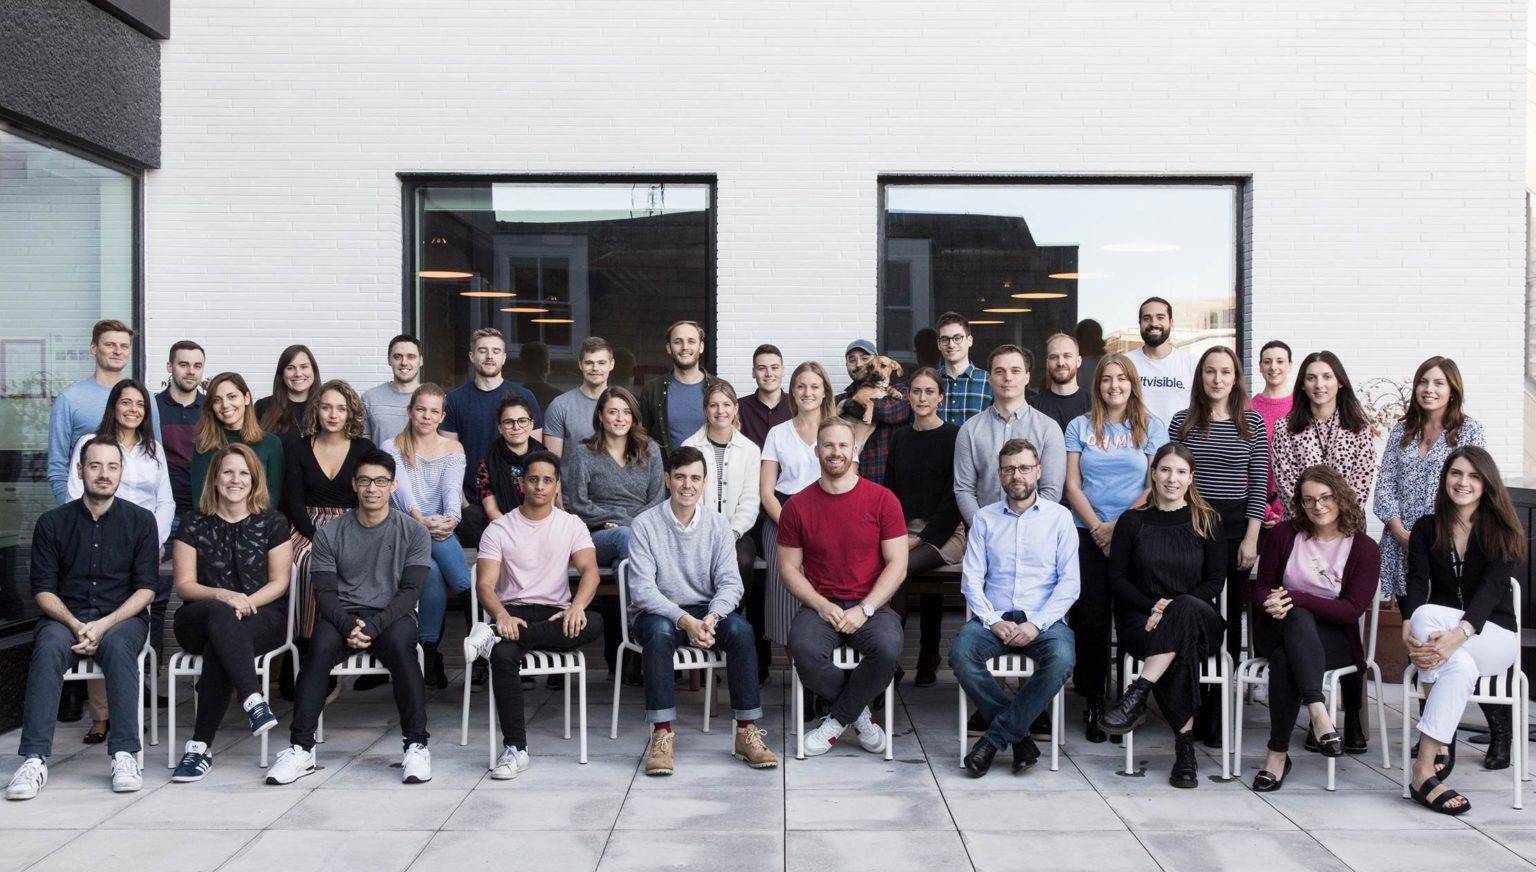 The Builtvisible team